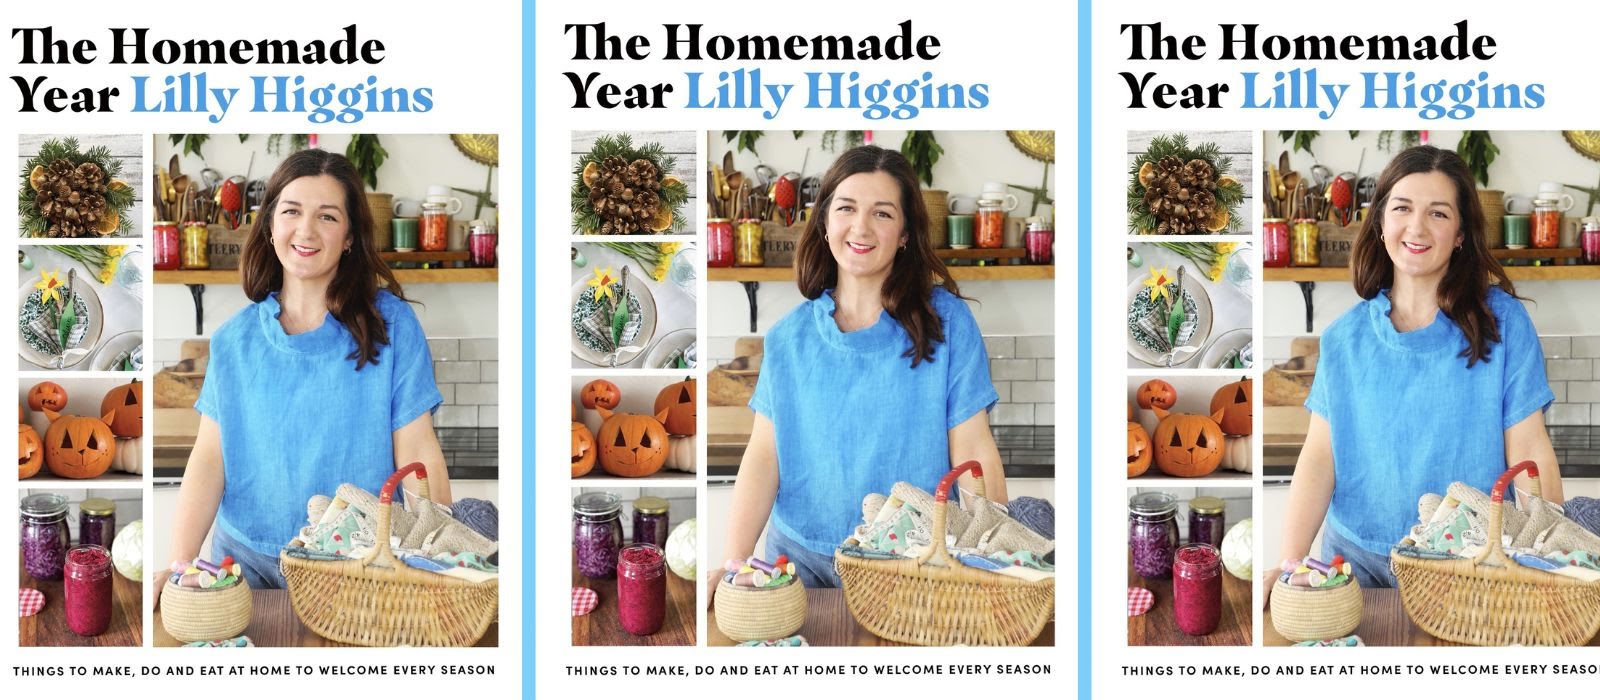 IMAGE Book Club: Read an extract from ‘The Homemade Year’ by Lilly Higgins